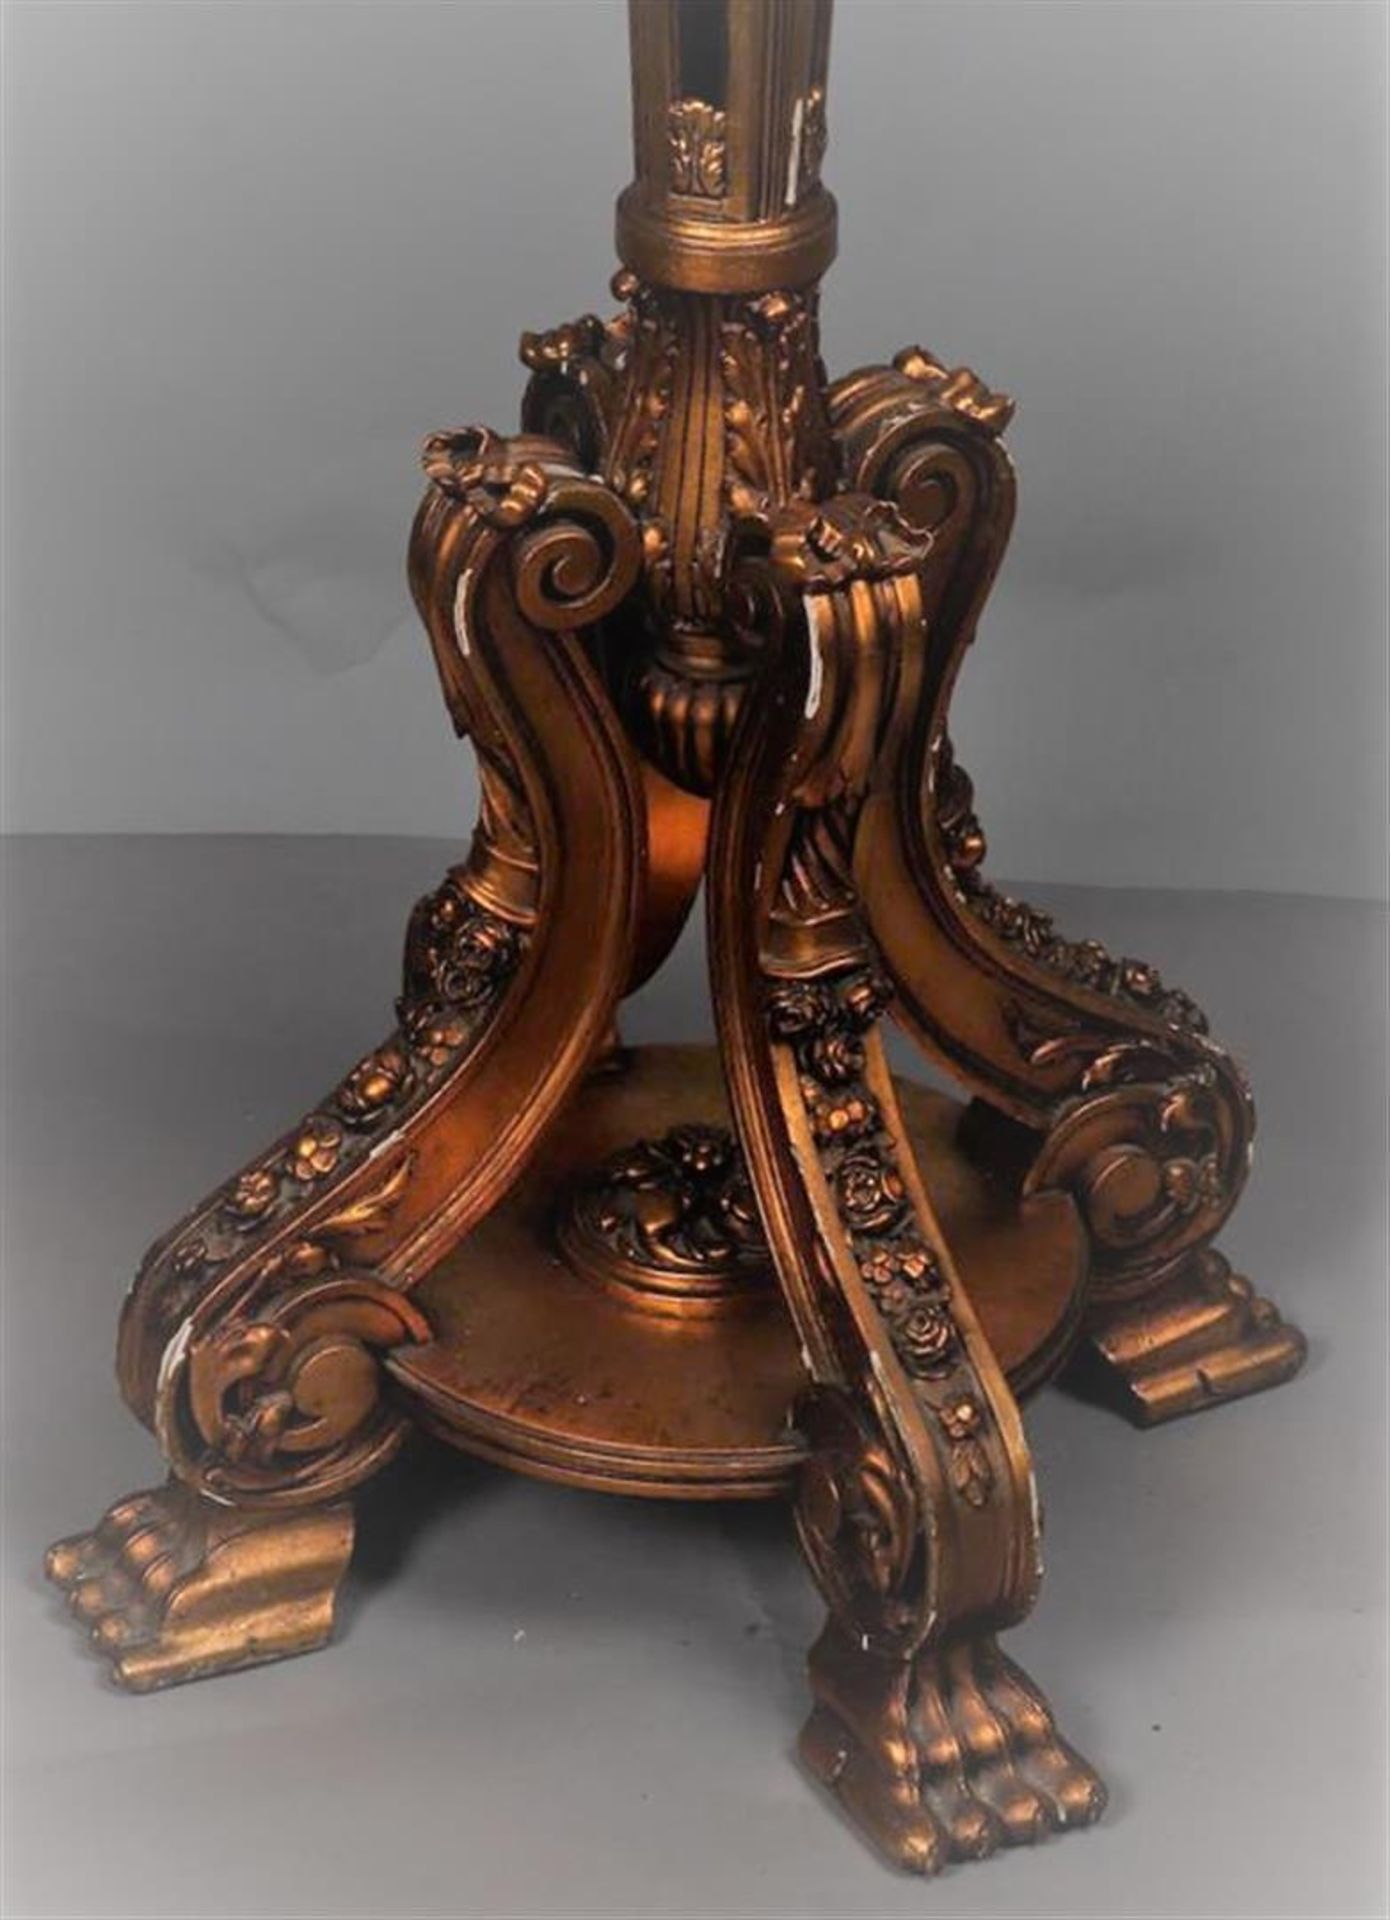 A richly decorated, bronzed wooden pedestal after an older example, 20th century. - Image 2 of 4